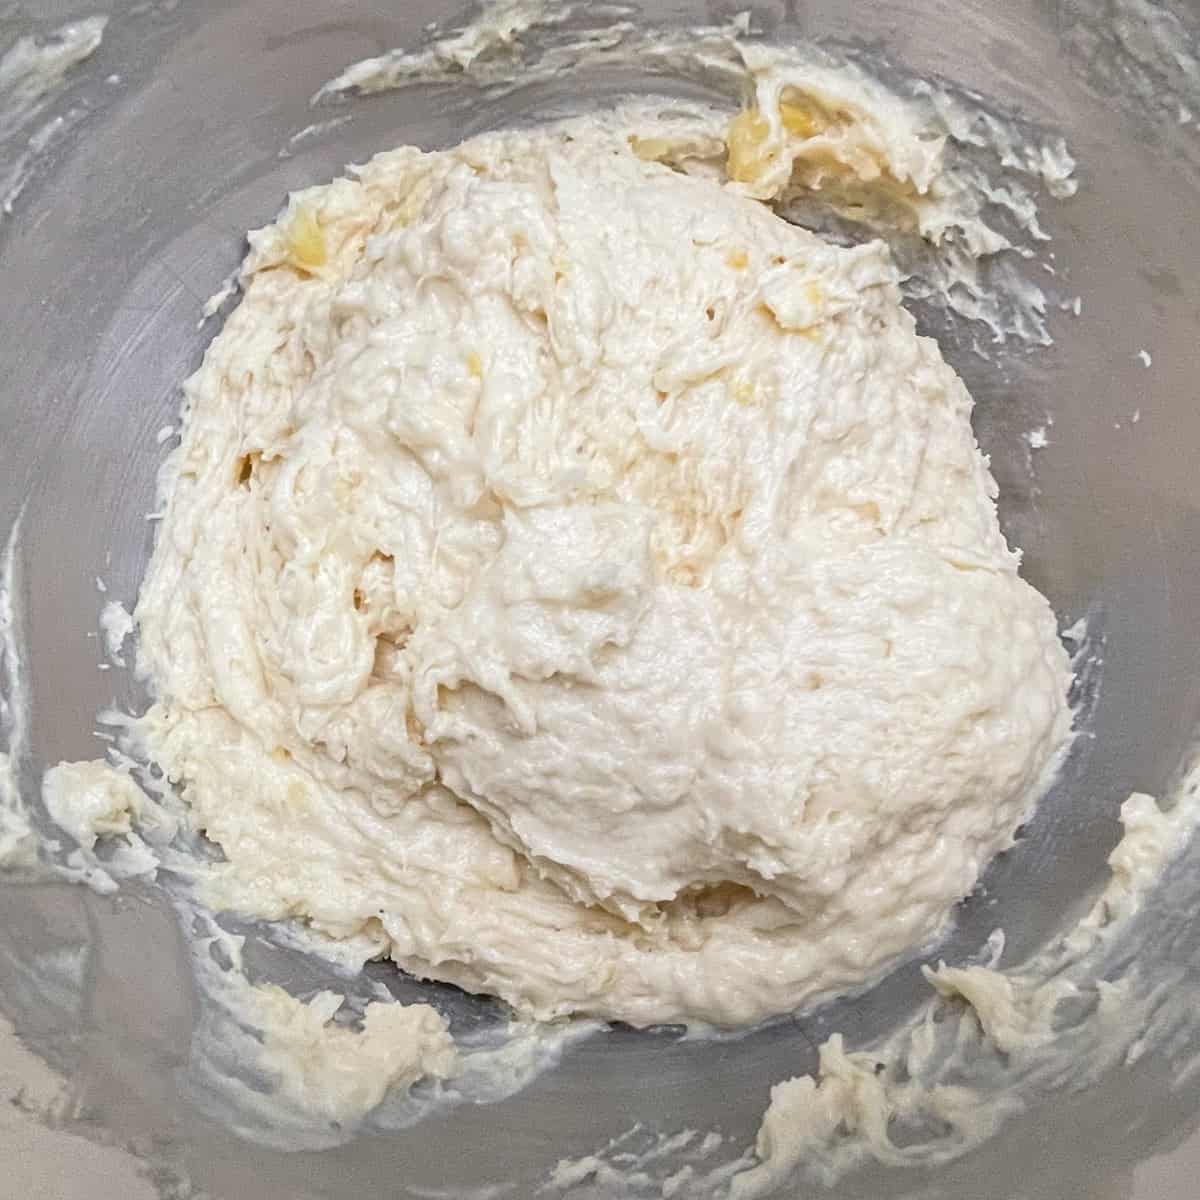 Pineapple coconut cookie dough is all mixed and ready to go into the refrigerator.